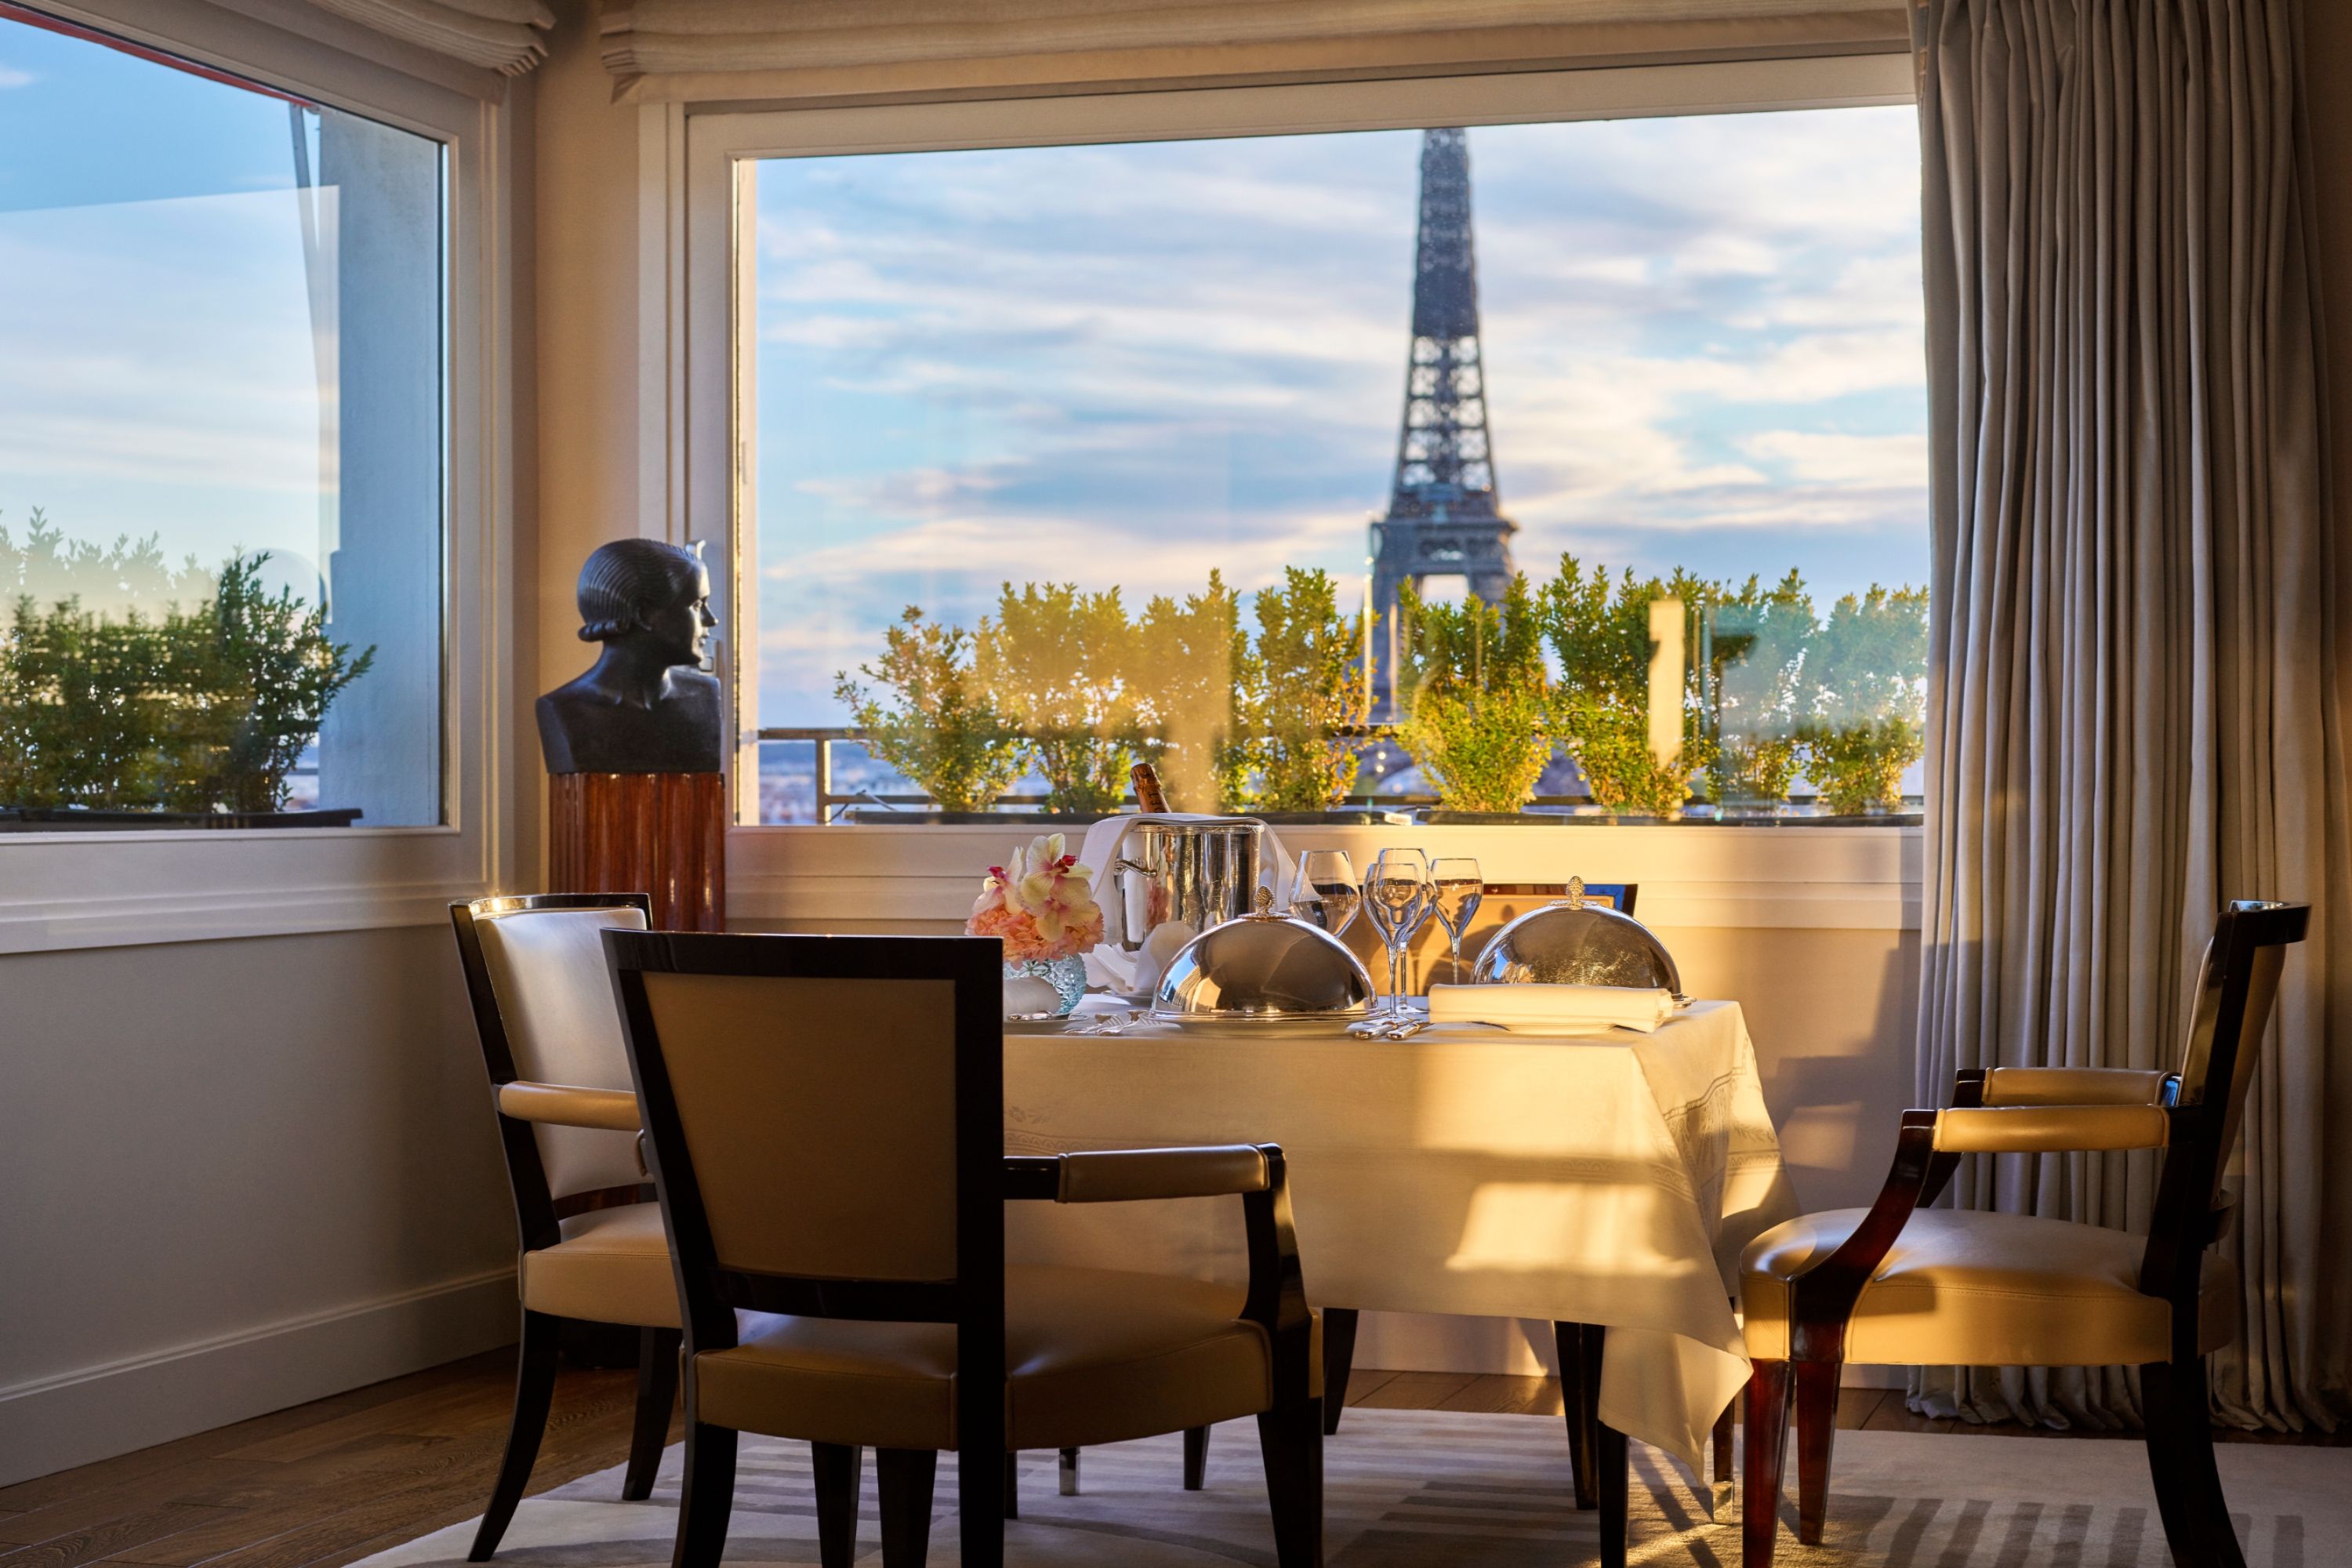 20 EPIC Views of The Eiffel Tower (Including Restaurants + Hotels)